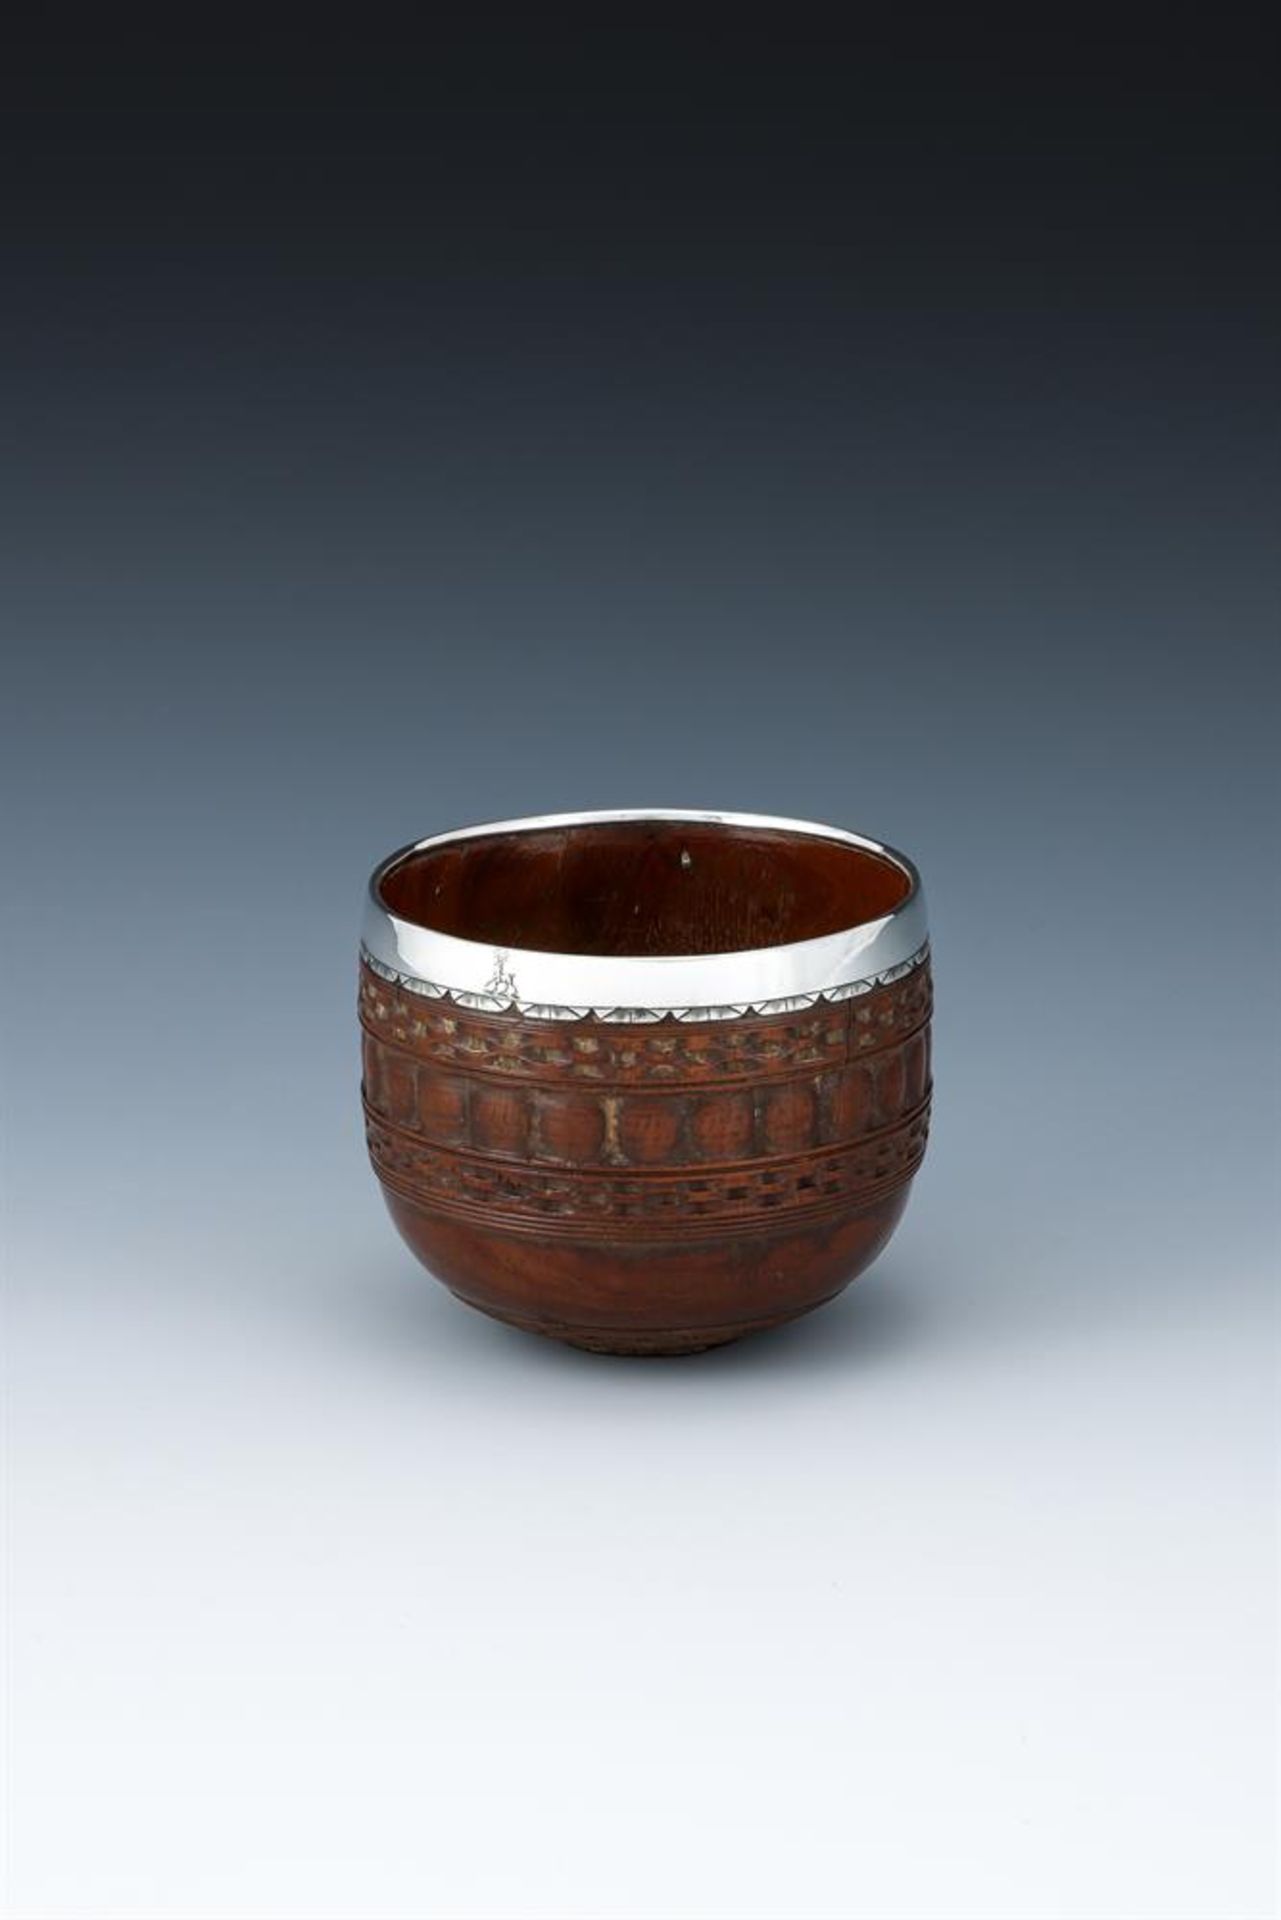 A SILVER MOUNTED LIGNUM VITAE DIPPER CUP - Image 2 of 4